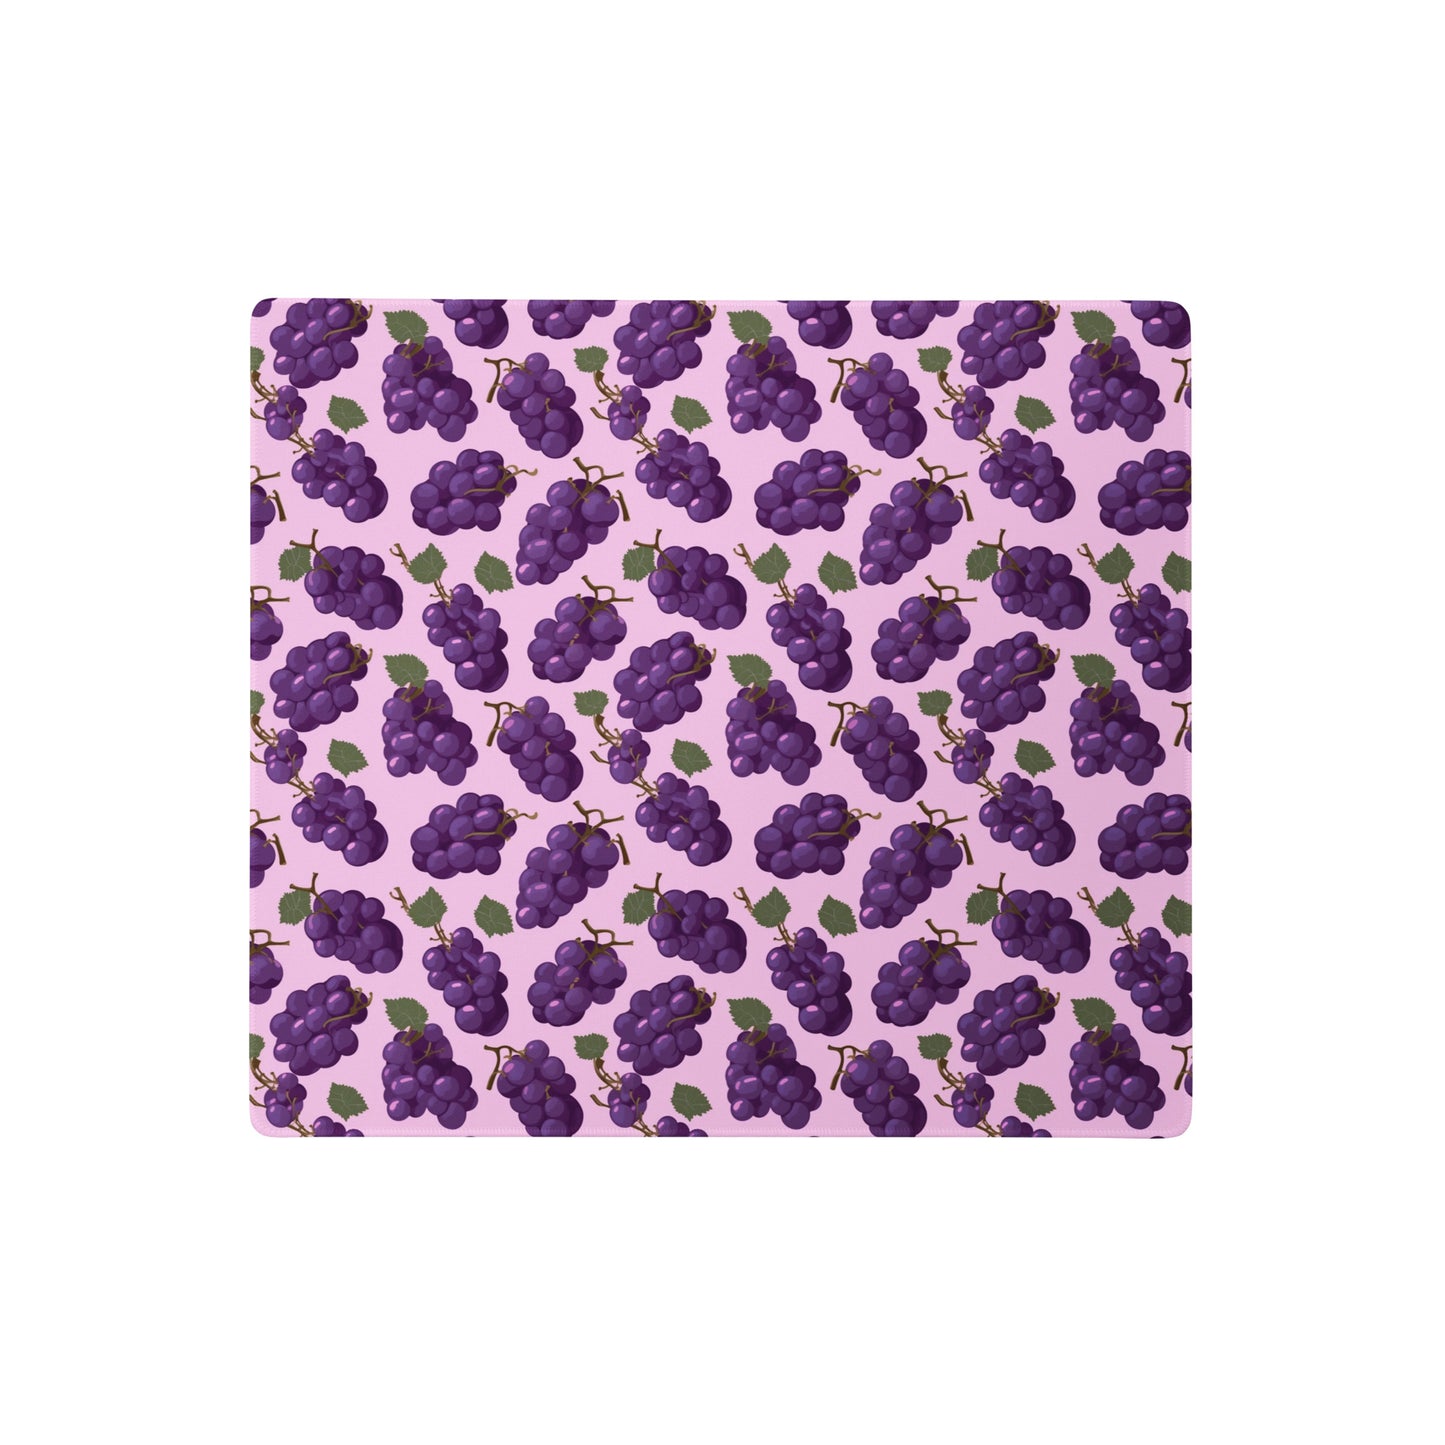 A 18" x 16" desk pad with bushels of grapes all over it. Purple in color.